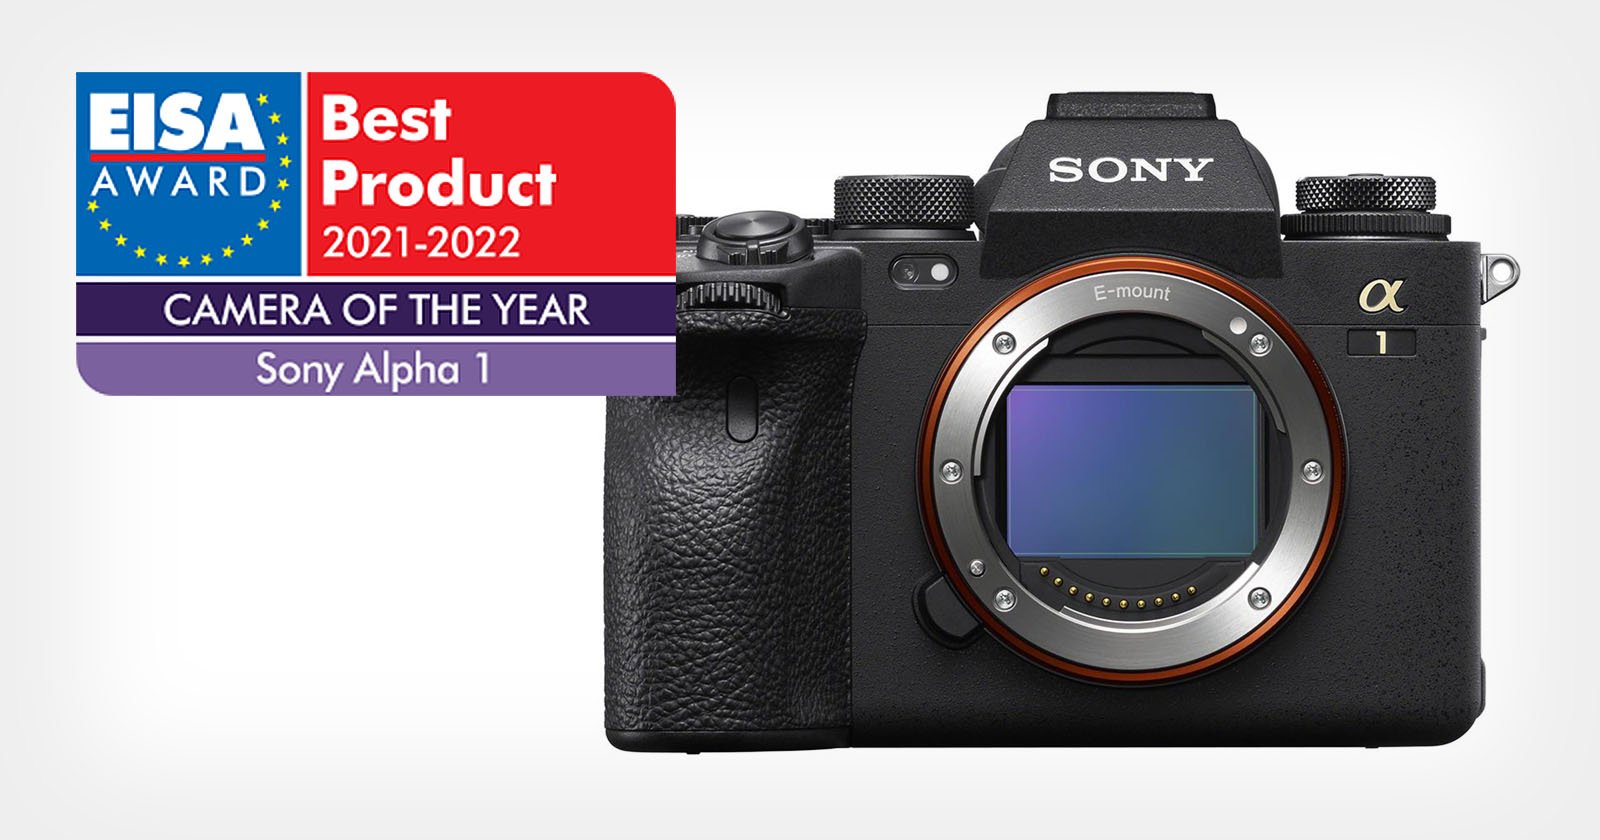 The Best Cameras and Lenses of 2021 According to the EISA Awards